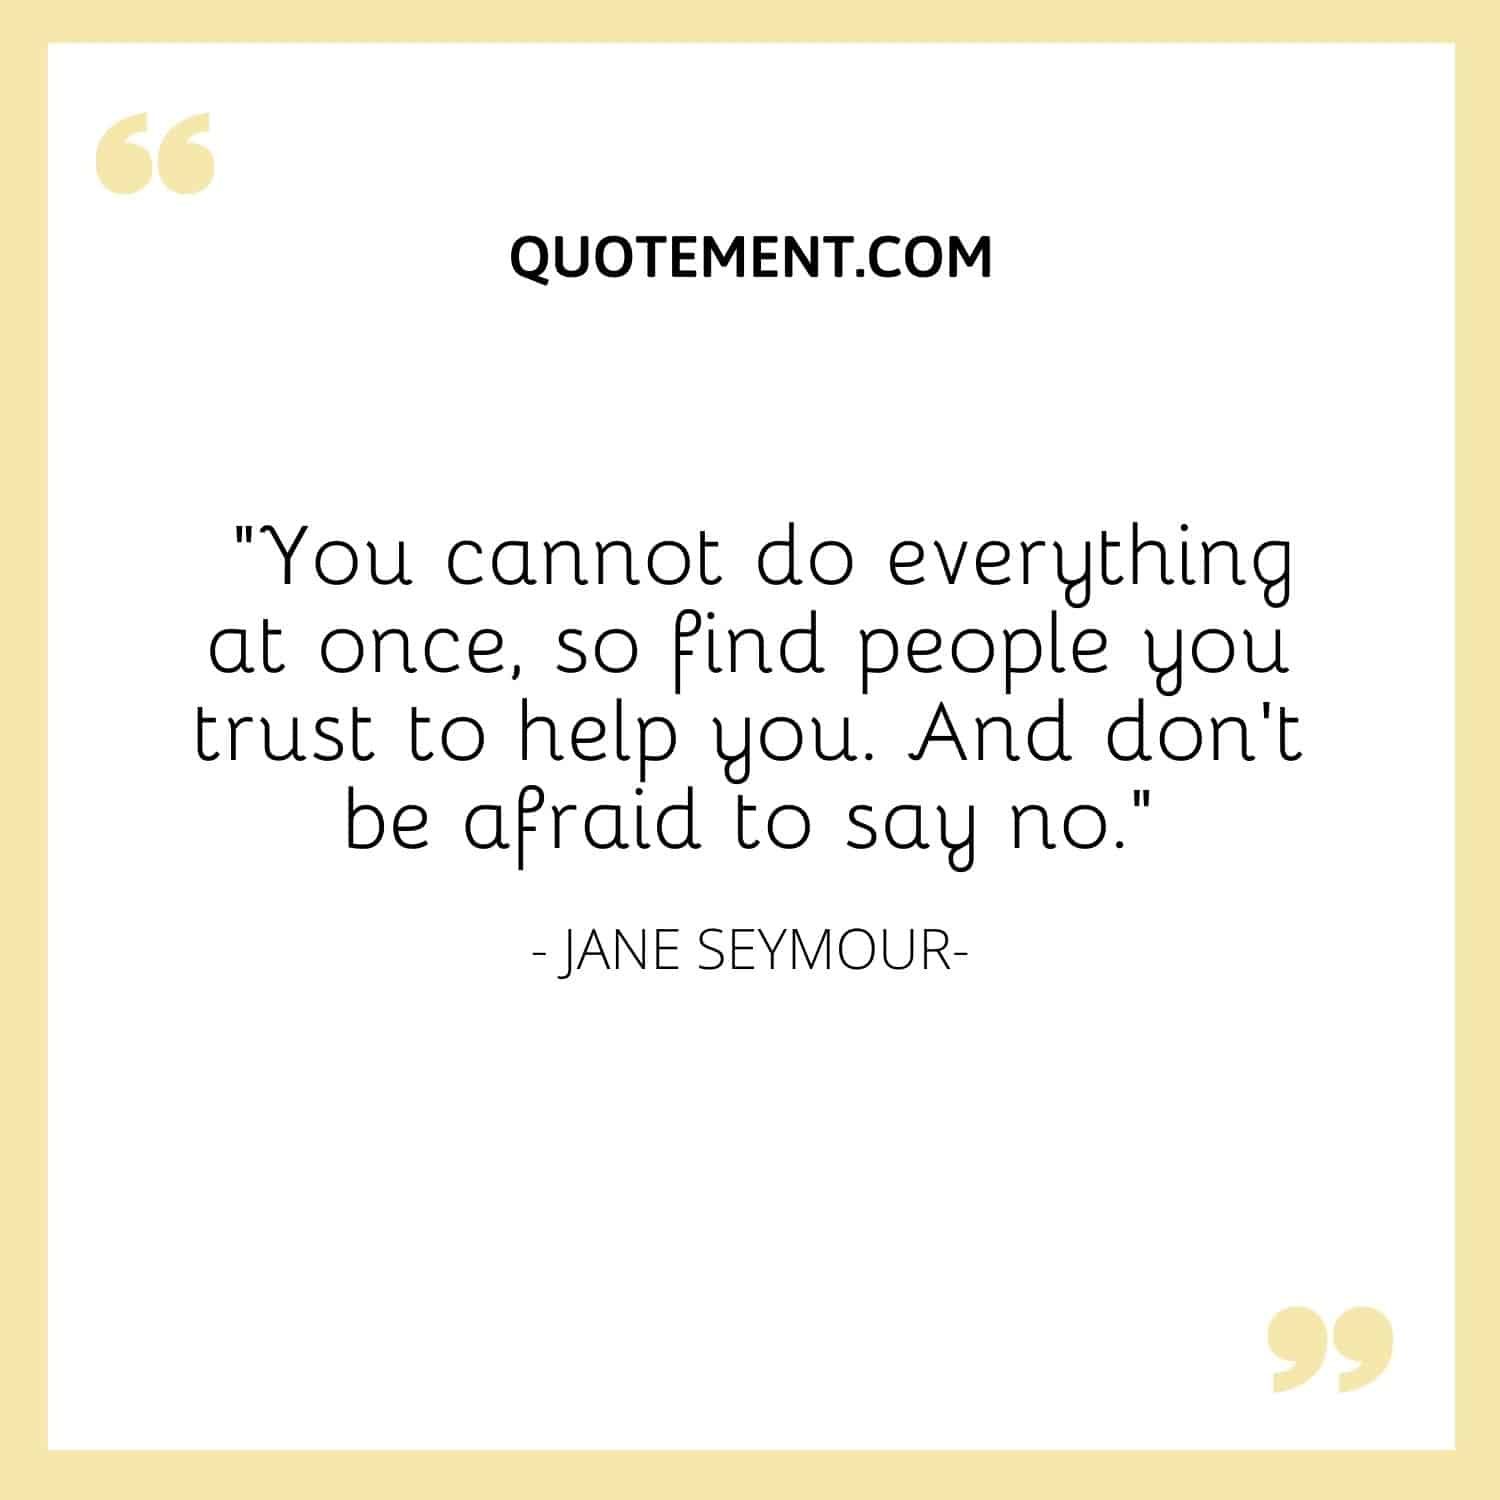 You cannot do everything at once, so find people you trust to help you. And don’t be afraid to say no